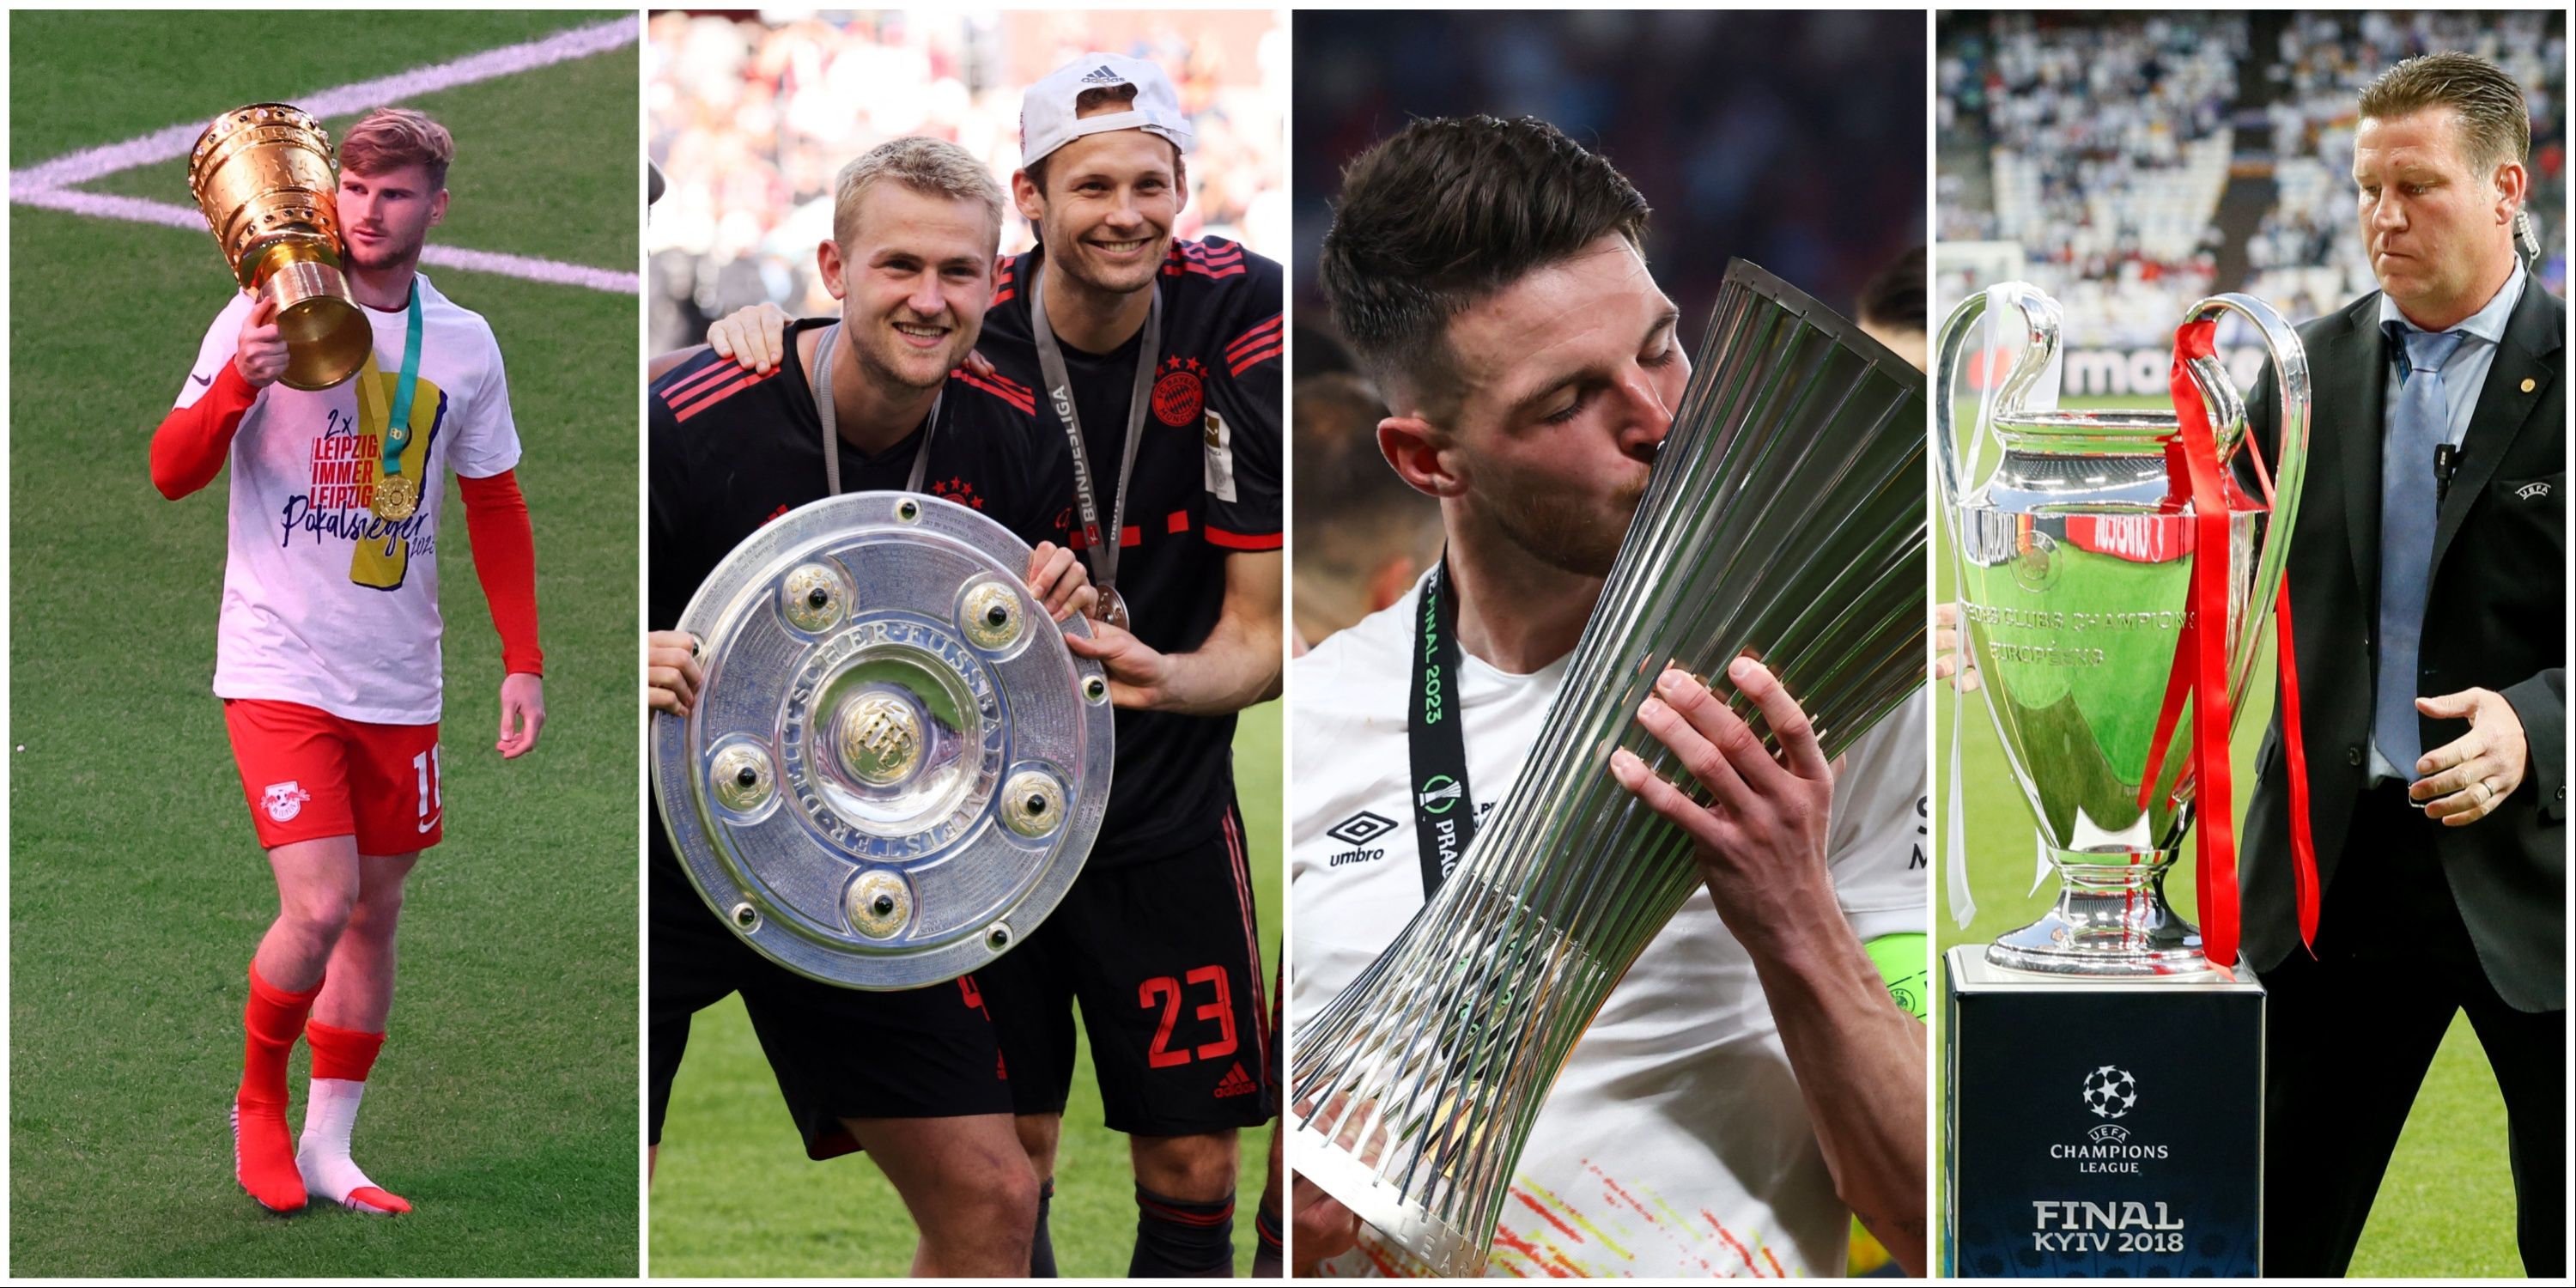 Werner, De Ligt and Rice celebrating trophy wins with their respective clubs.